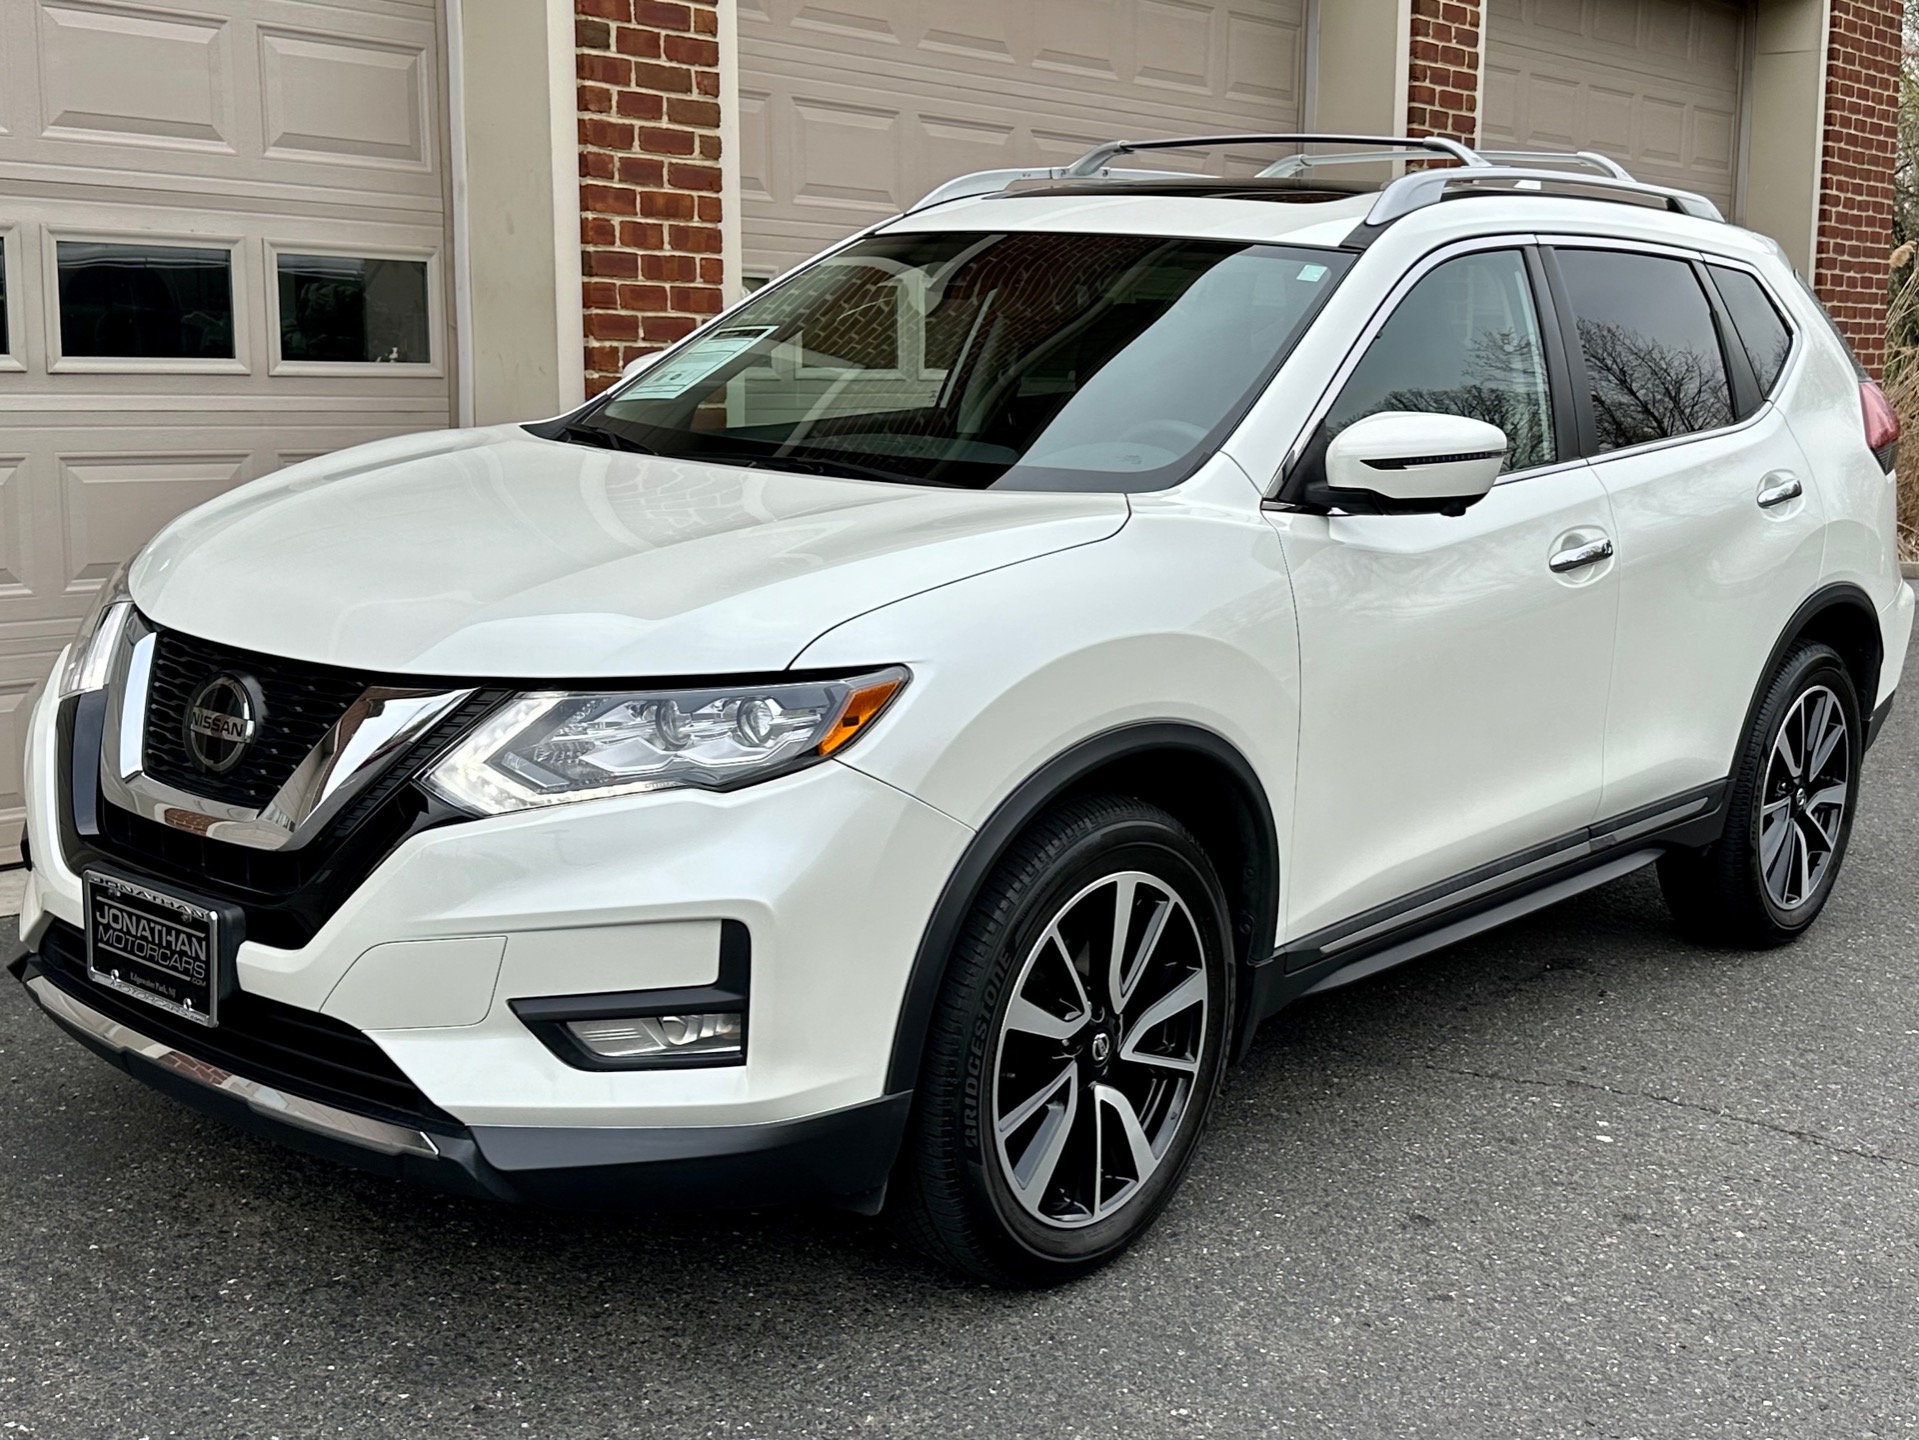 2020 Nissan Rogue SL Premium Package Stock 760259 for sale near